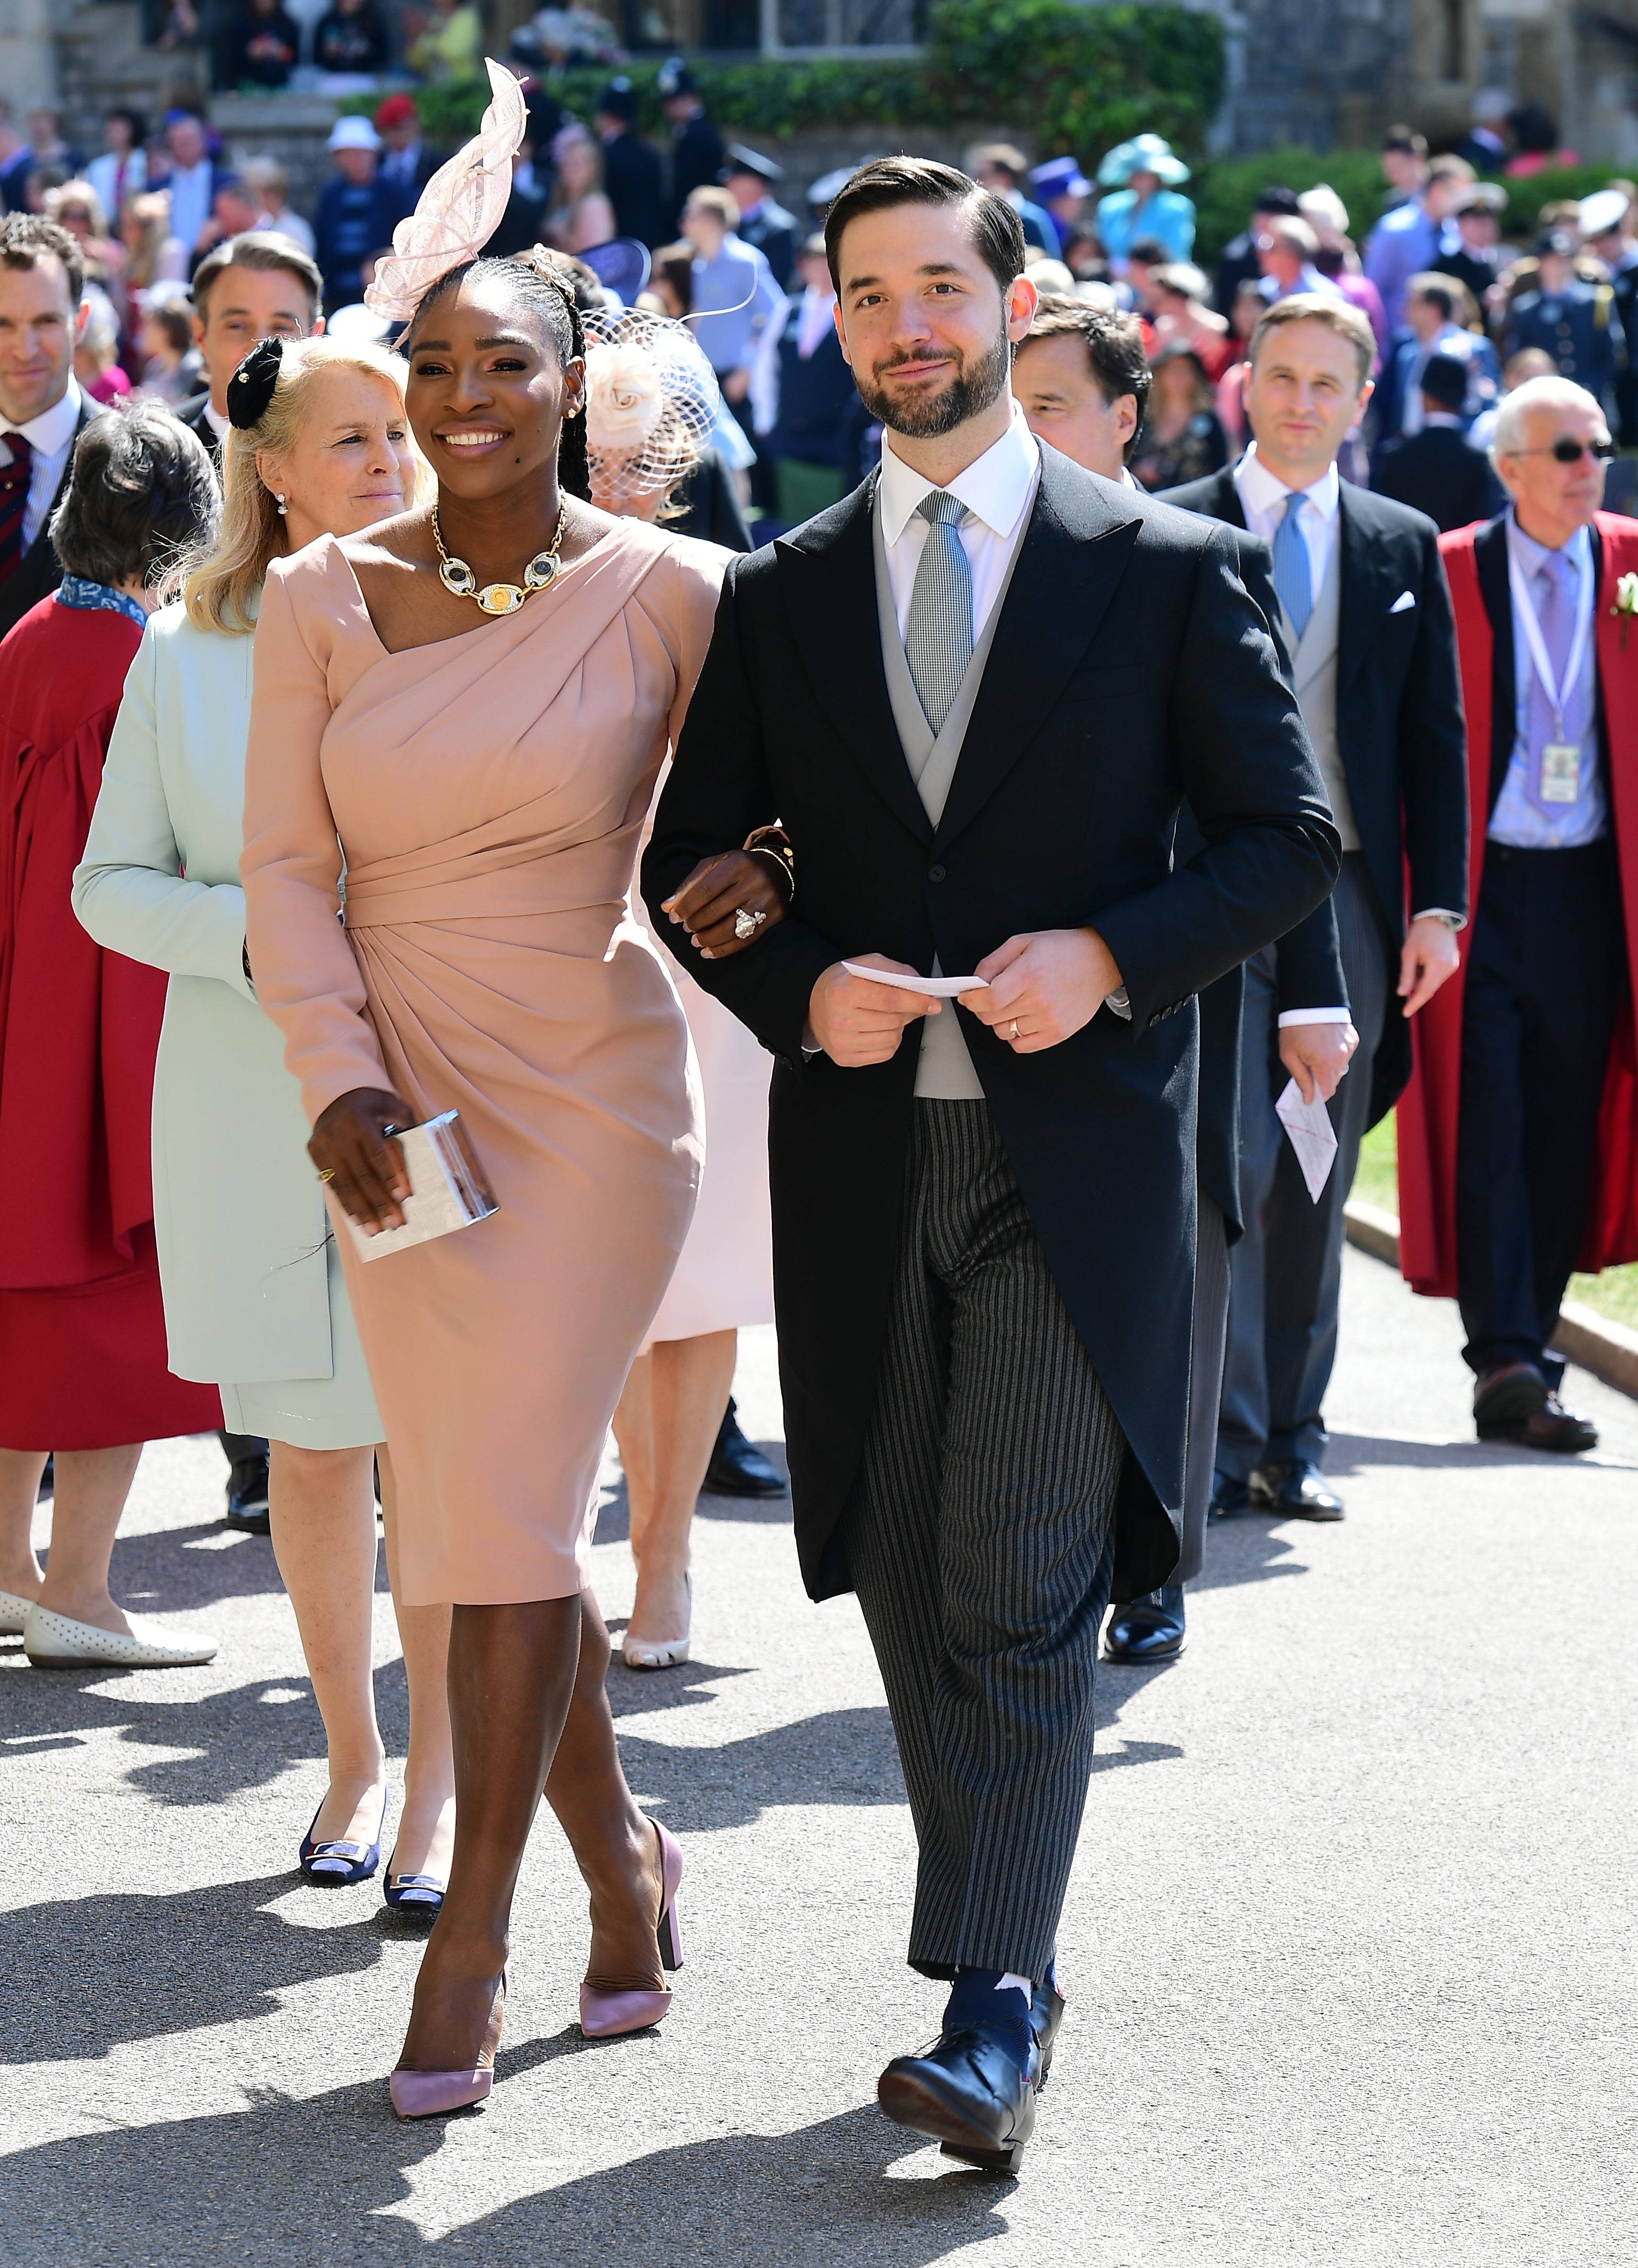 Serena Williams and her husband Alexis Ohanian arrive at St George’s Chapel at Windsor Castle for the wedding of Meghan Markle and Prince Harry (Ian West/PA)